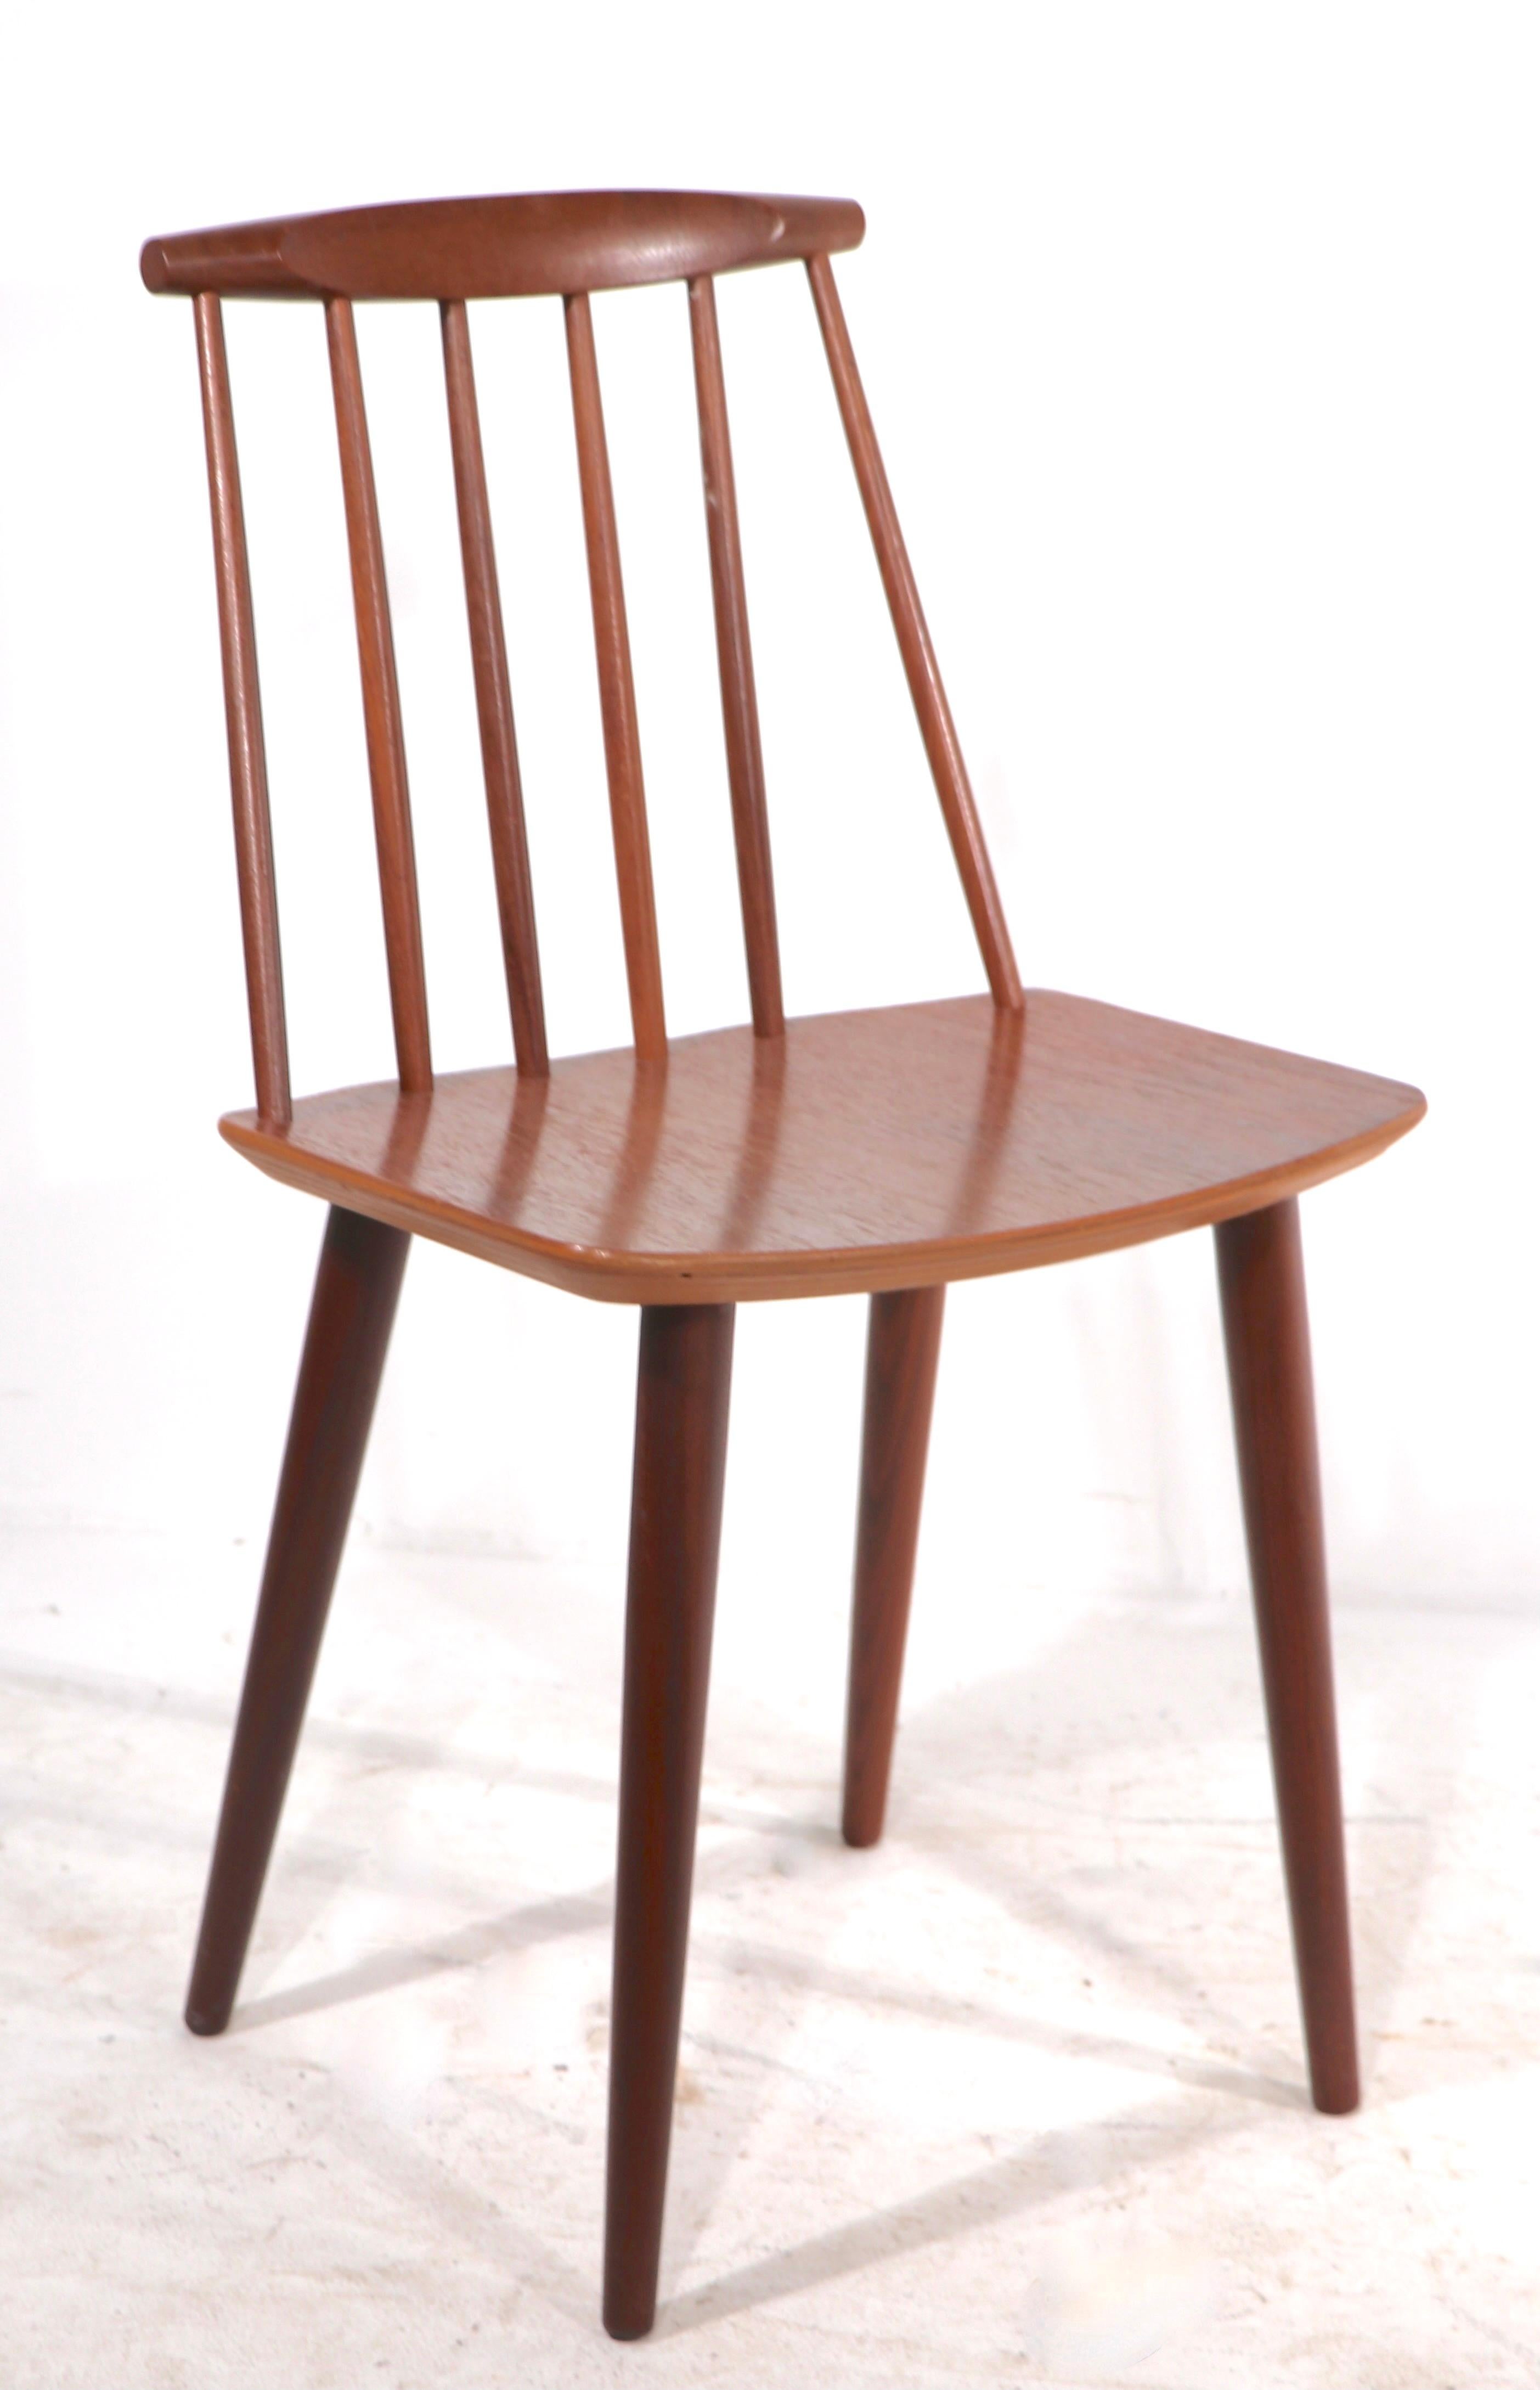 Iconic Danish Modern J 77 dining chairs in teak, designed by Folke Palsson made by FDB Mobler - Denmark circa 1960's. Timeless modern style, still relevant today. Original, clean and ready to use condition. Offered and priced as a set of 4.